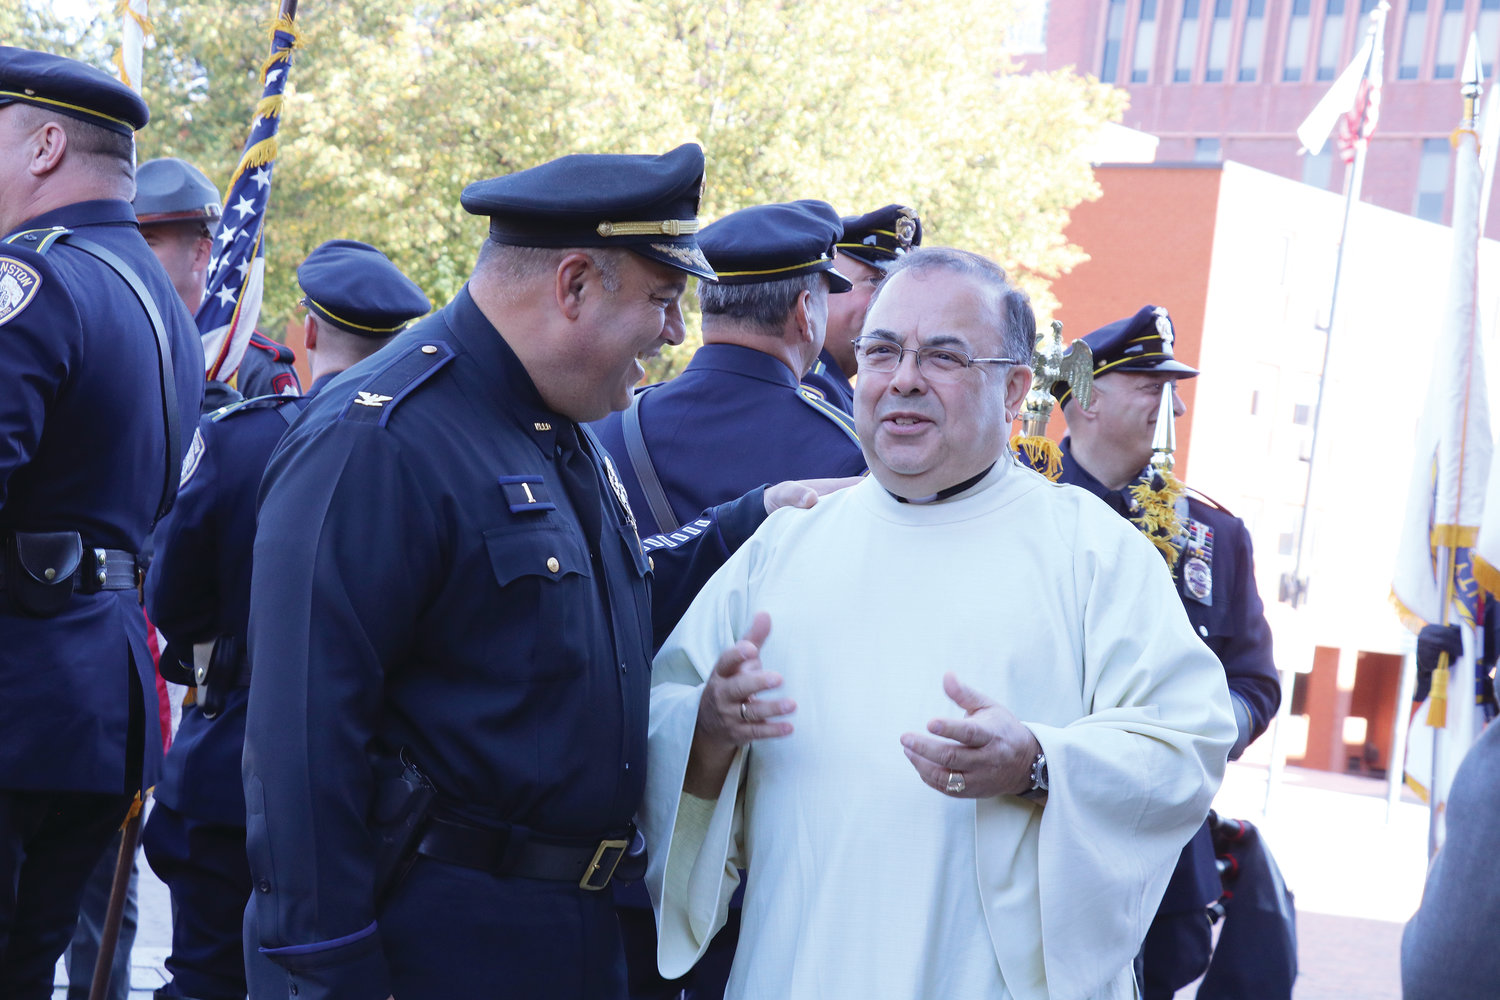 Father Joseph Escobar, pastor of Our Lady of the Rosary Parish in Providence, who has served as chaplain to the Rhode Island Police Chiefs Association since 2006, smiles with North Providence Police Chief David Tikoian.